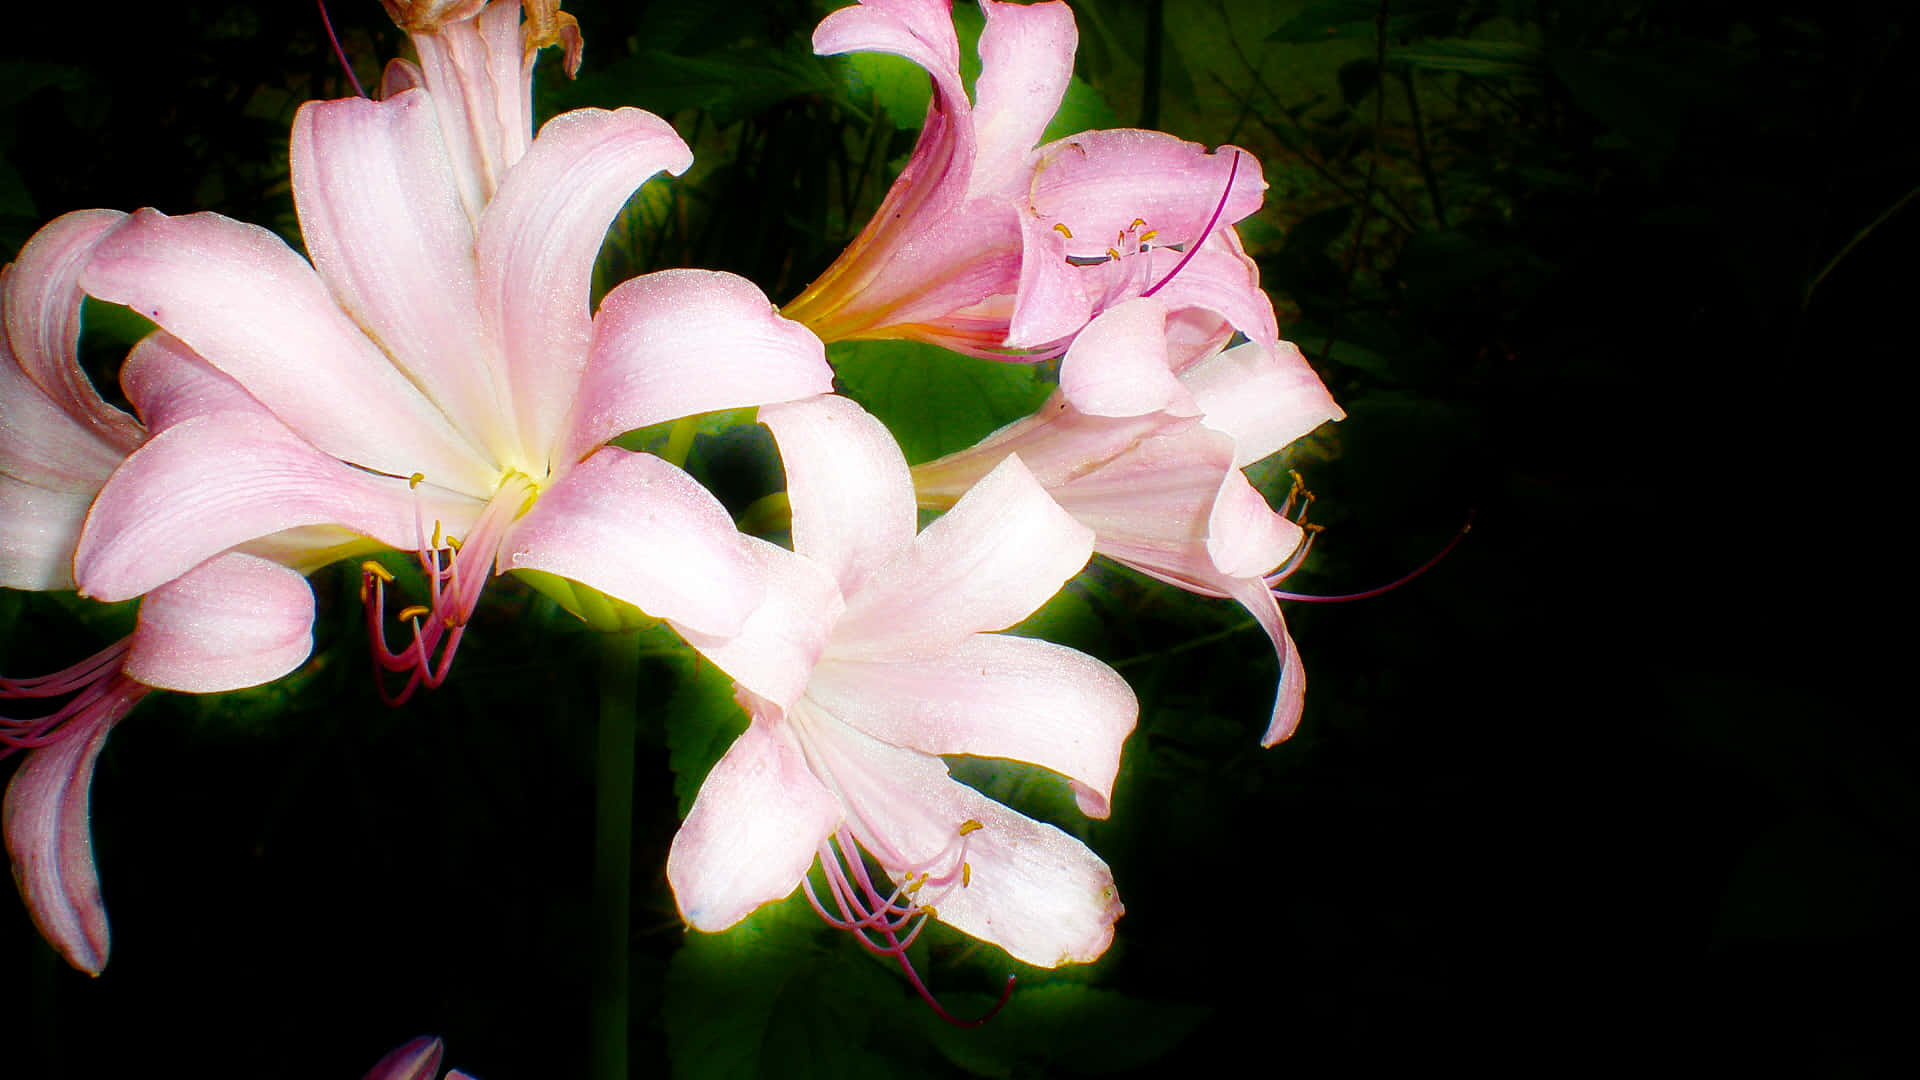 Elegant White Lilies on a Beautiful Blurred Background